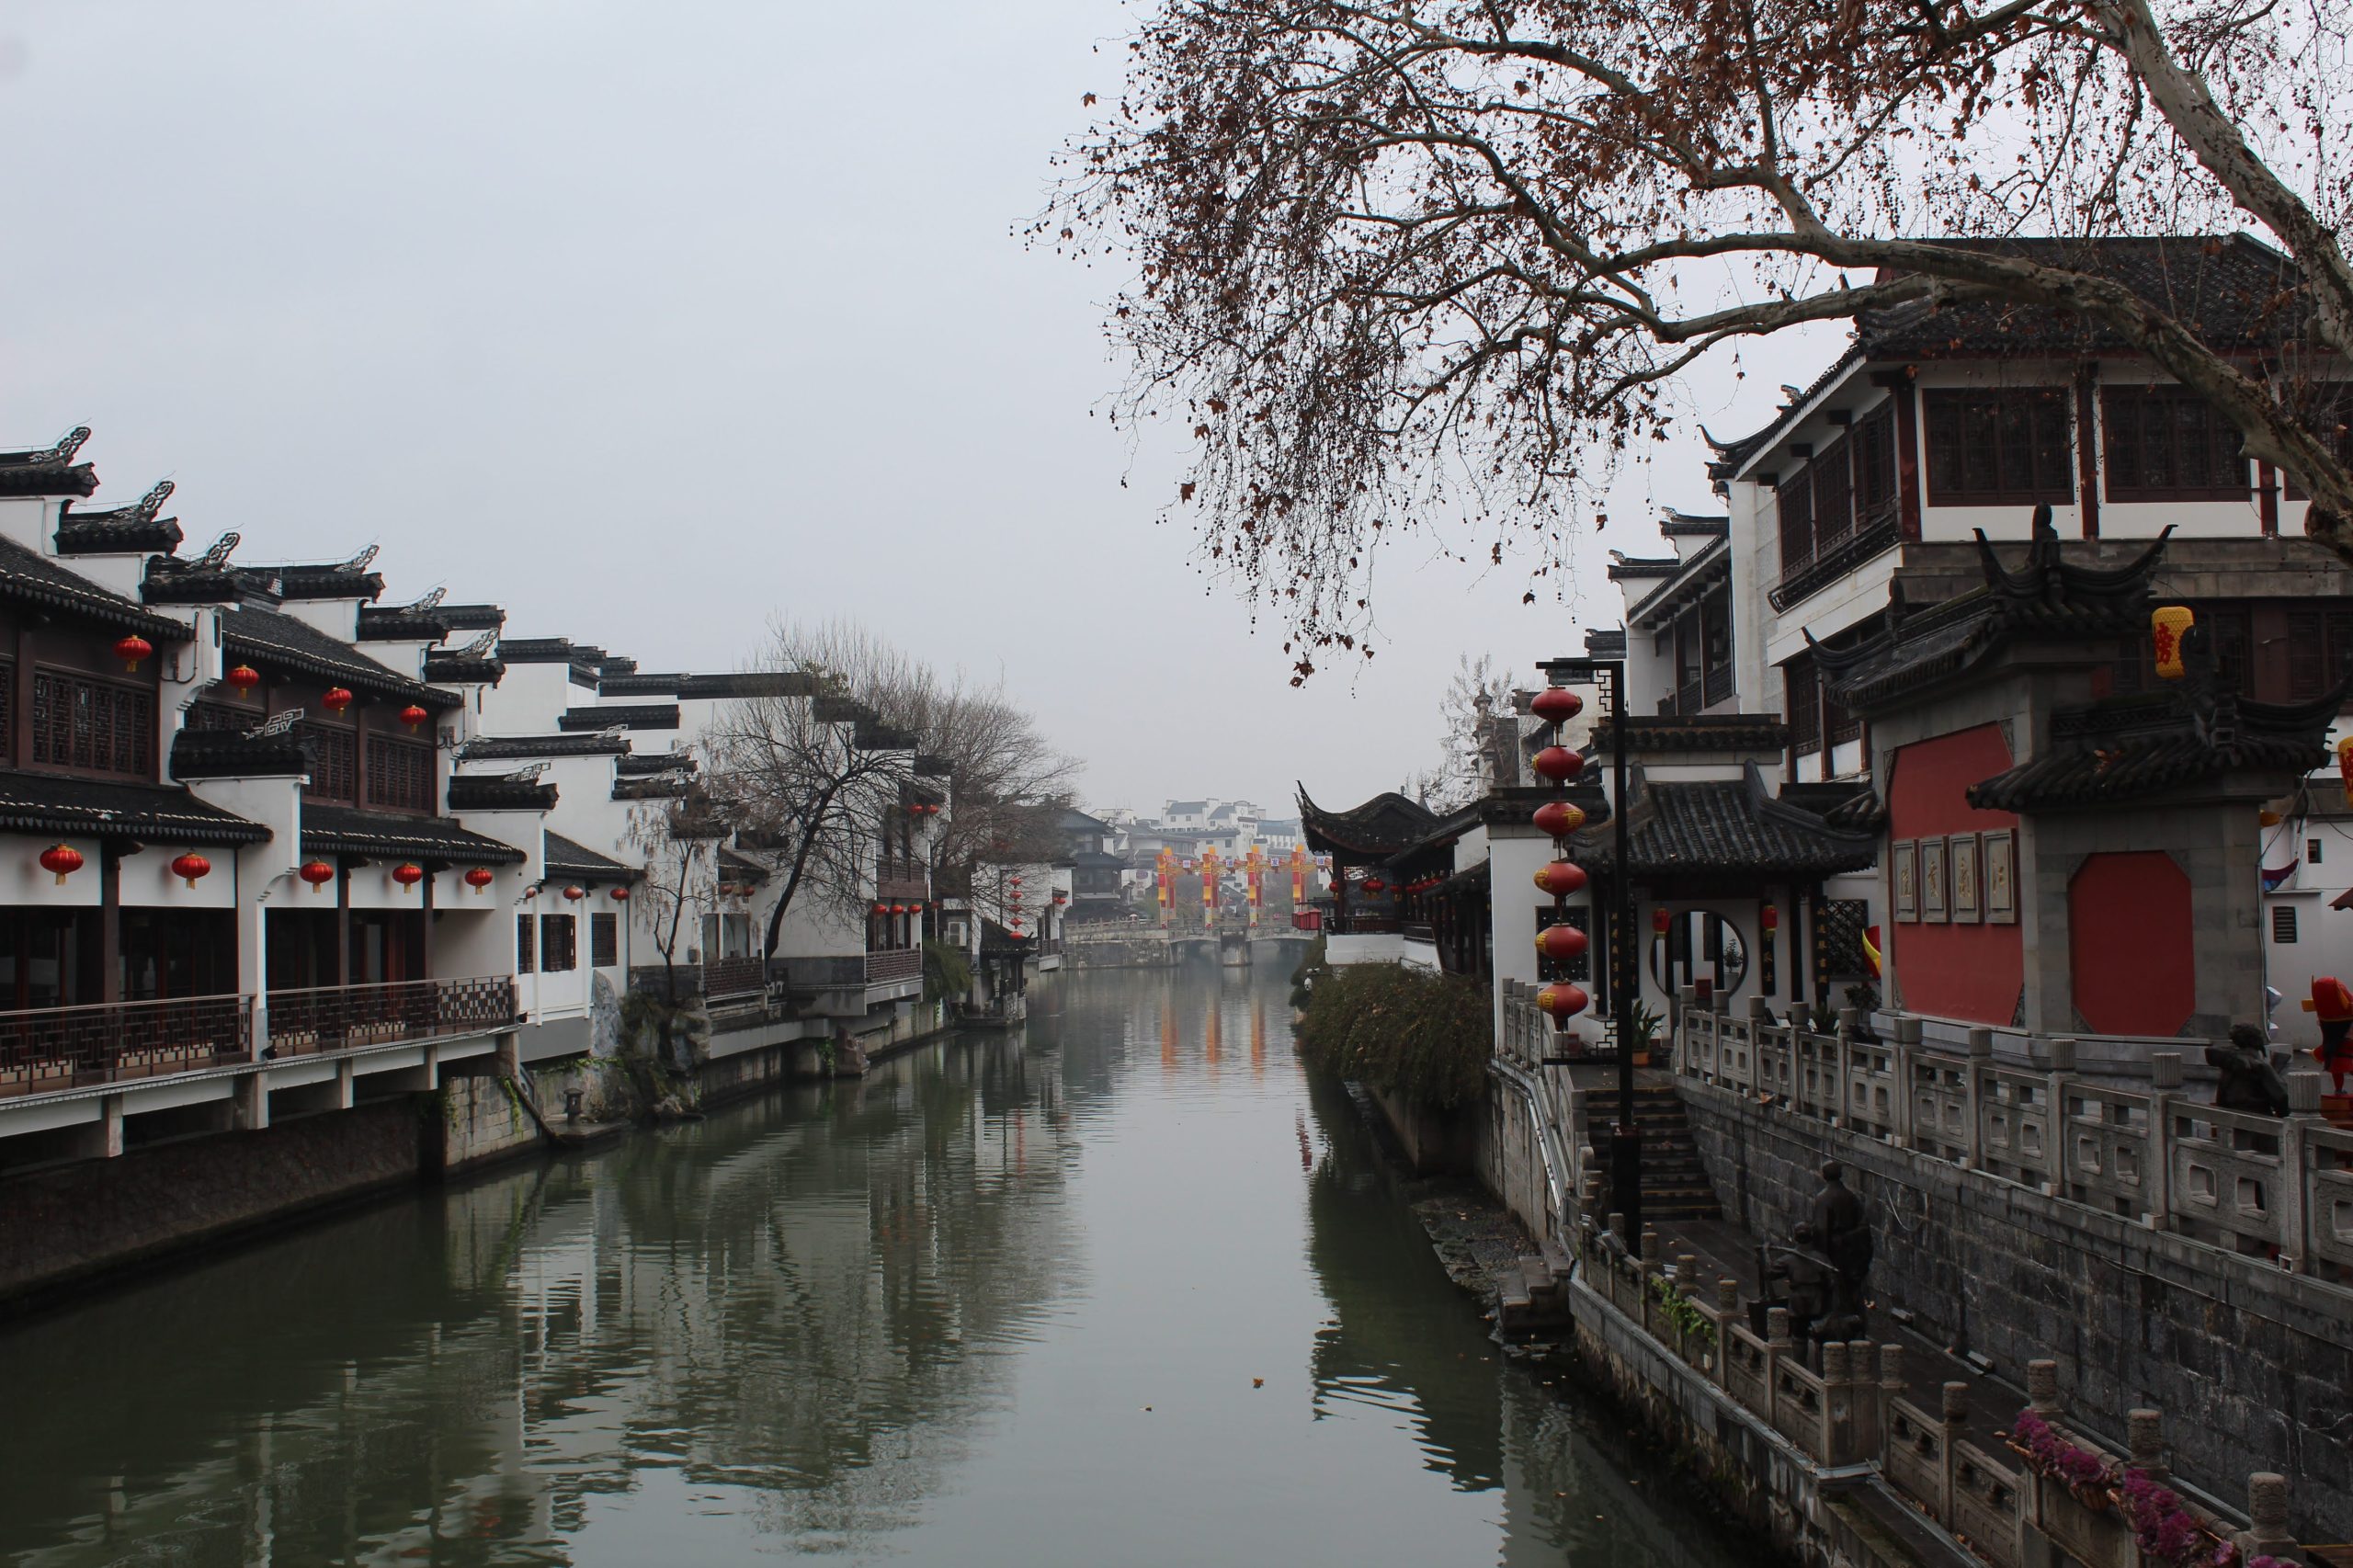 A day trip to Nanjing from Beijing